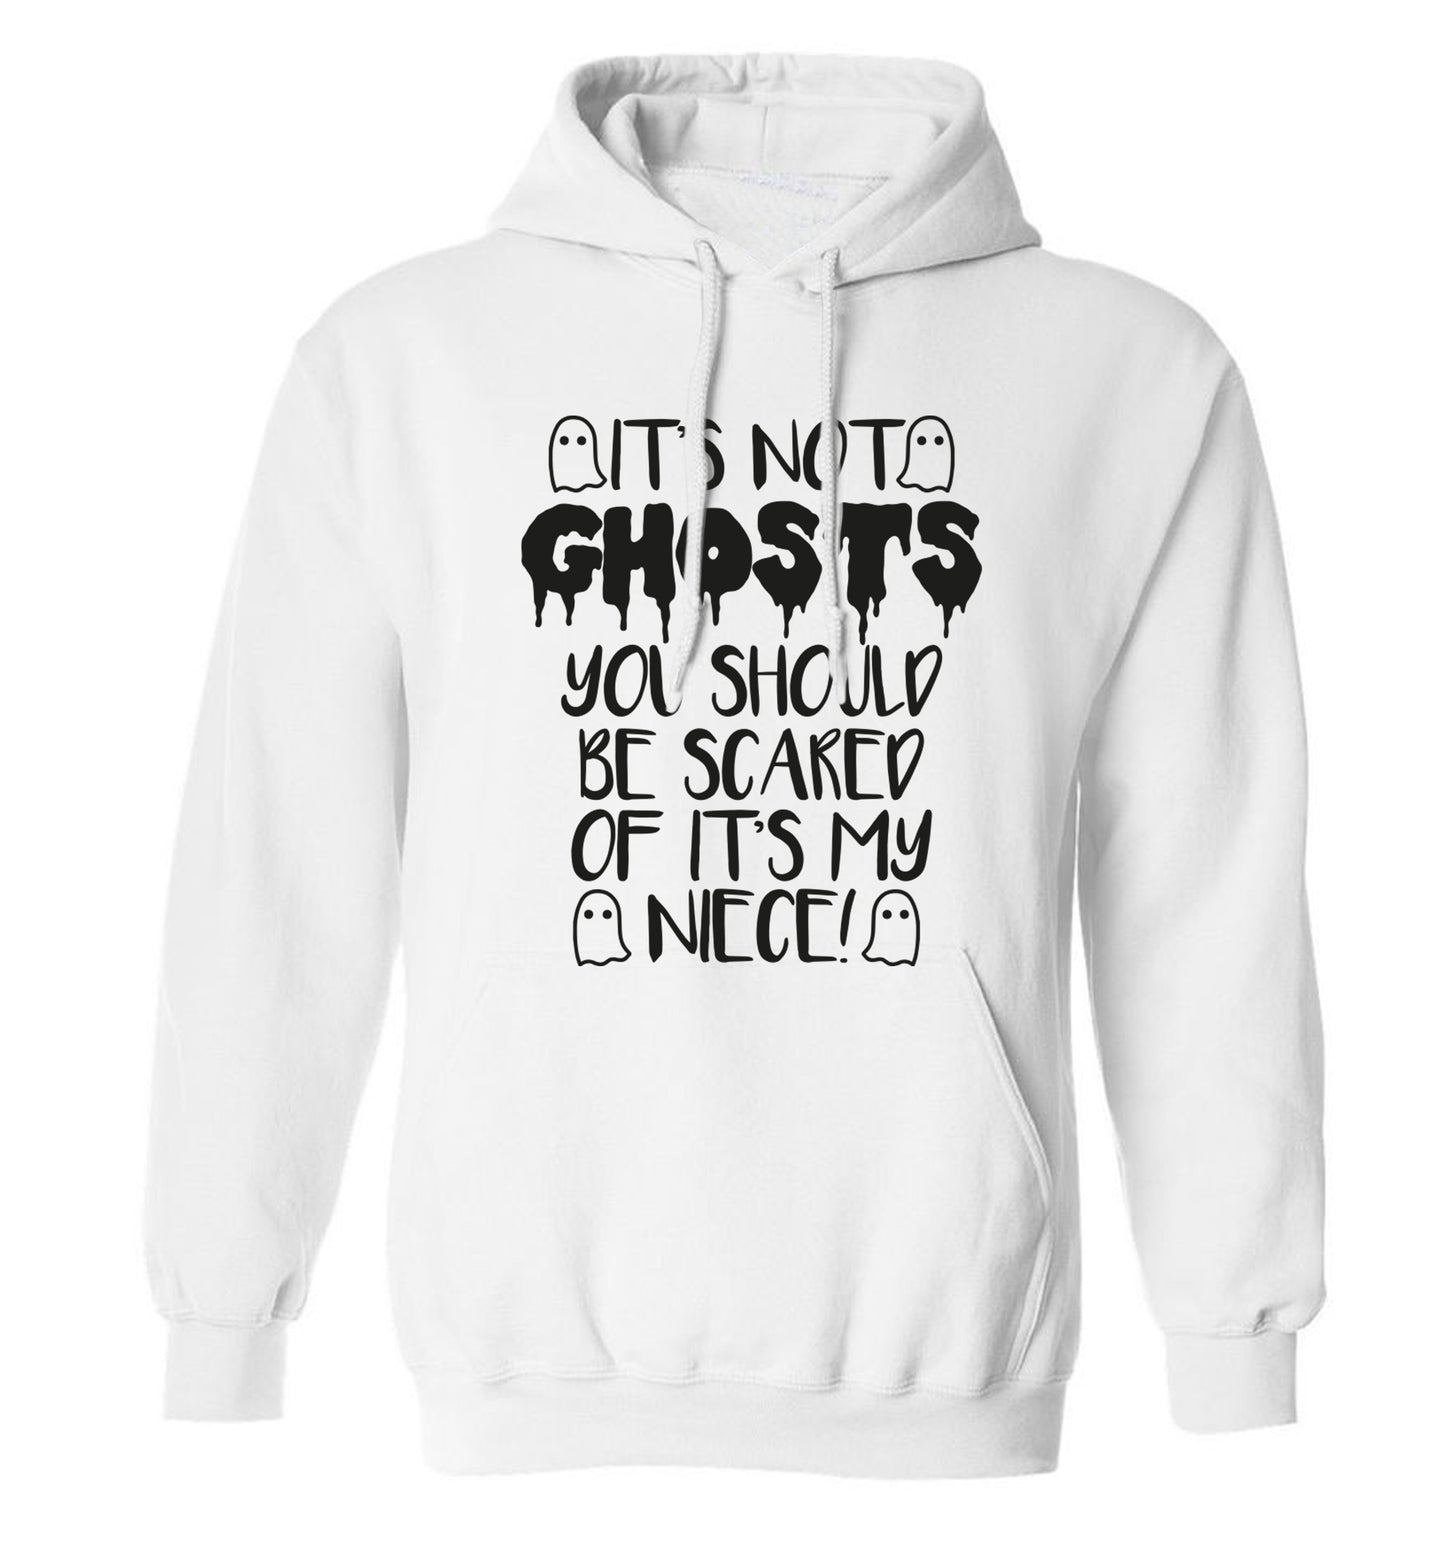 It's not ghosts you should be scared of it's my niece! adults unisex white hoodie 2XL